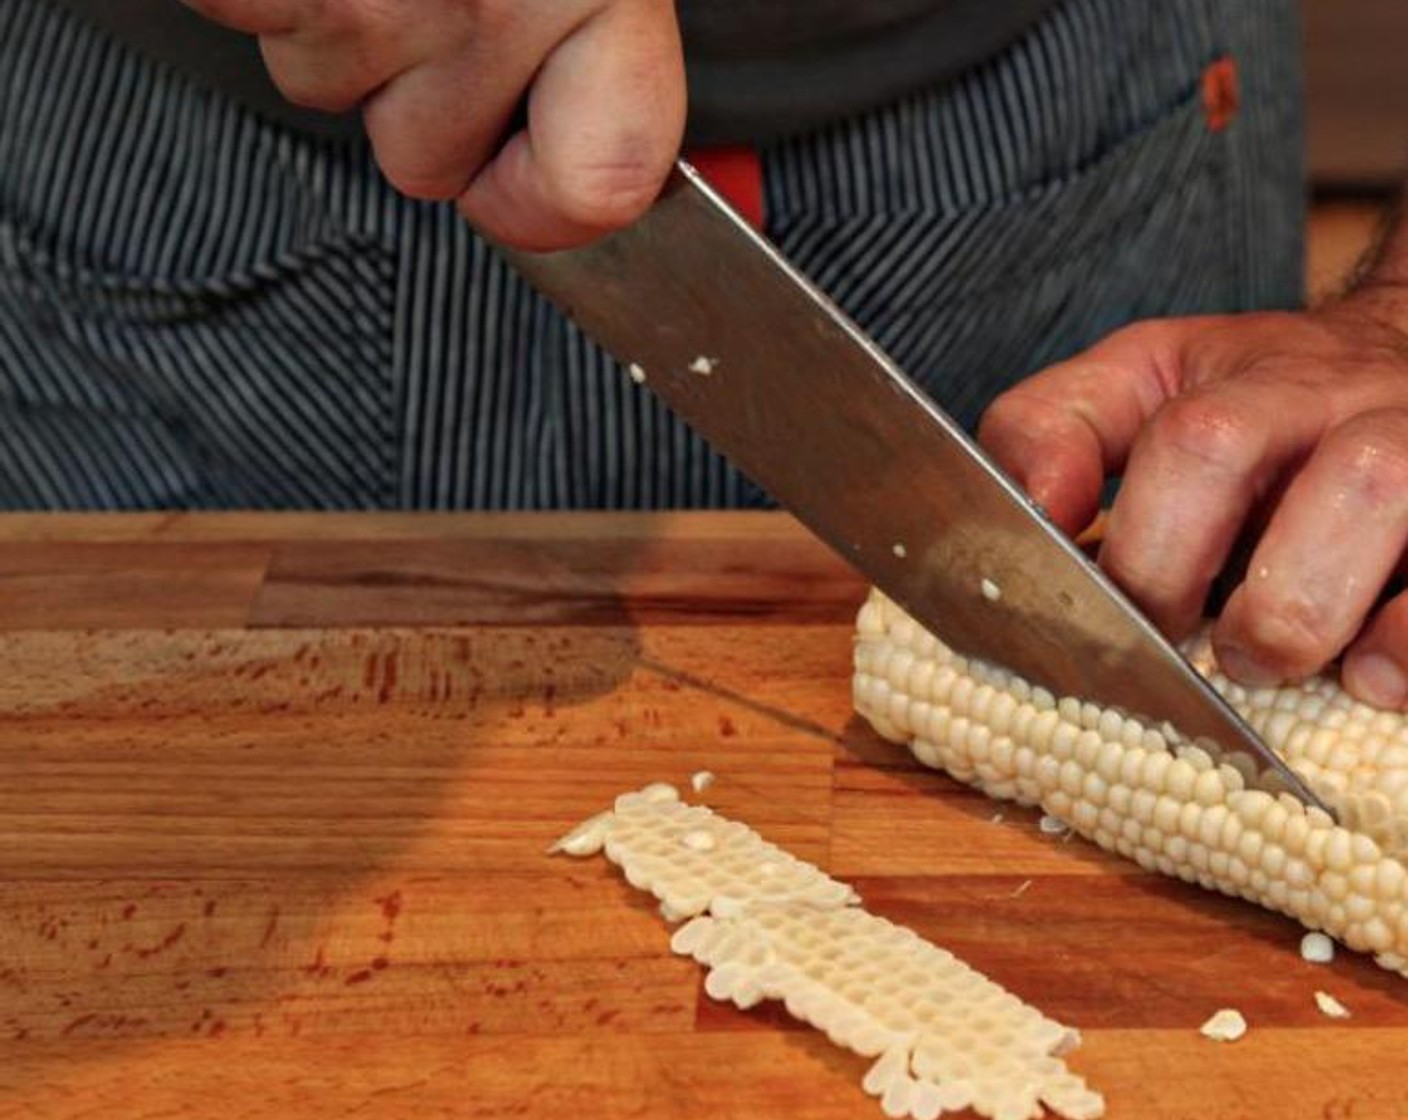 step 3 Using a large, sharp knife and taking care to keep your fingers above and out of the way of the knife, run the bald down the outside edge of the ear to cut kernels away from the cob. Turn the ear slightly and repeat, until all the kernels are cut from the cob.